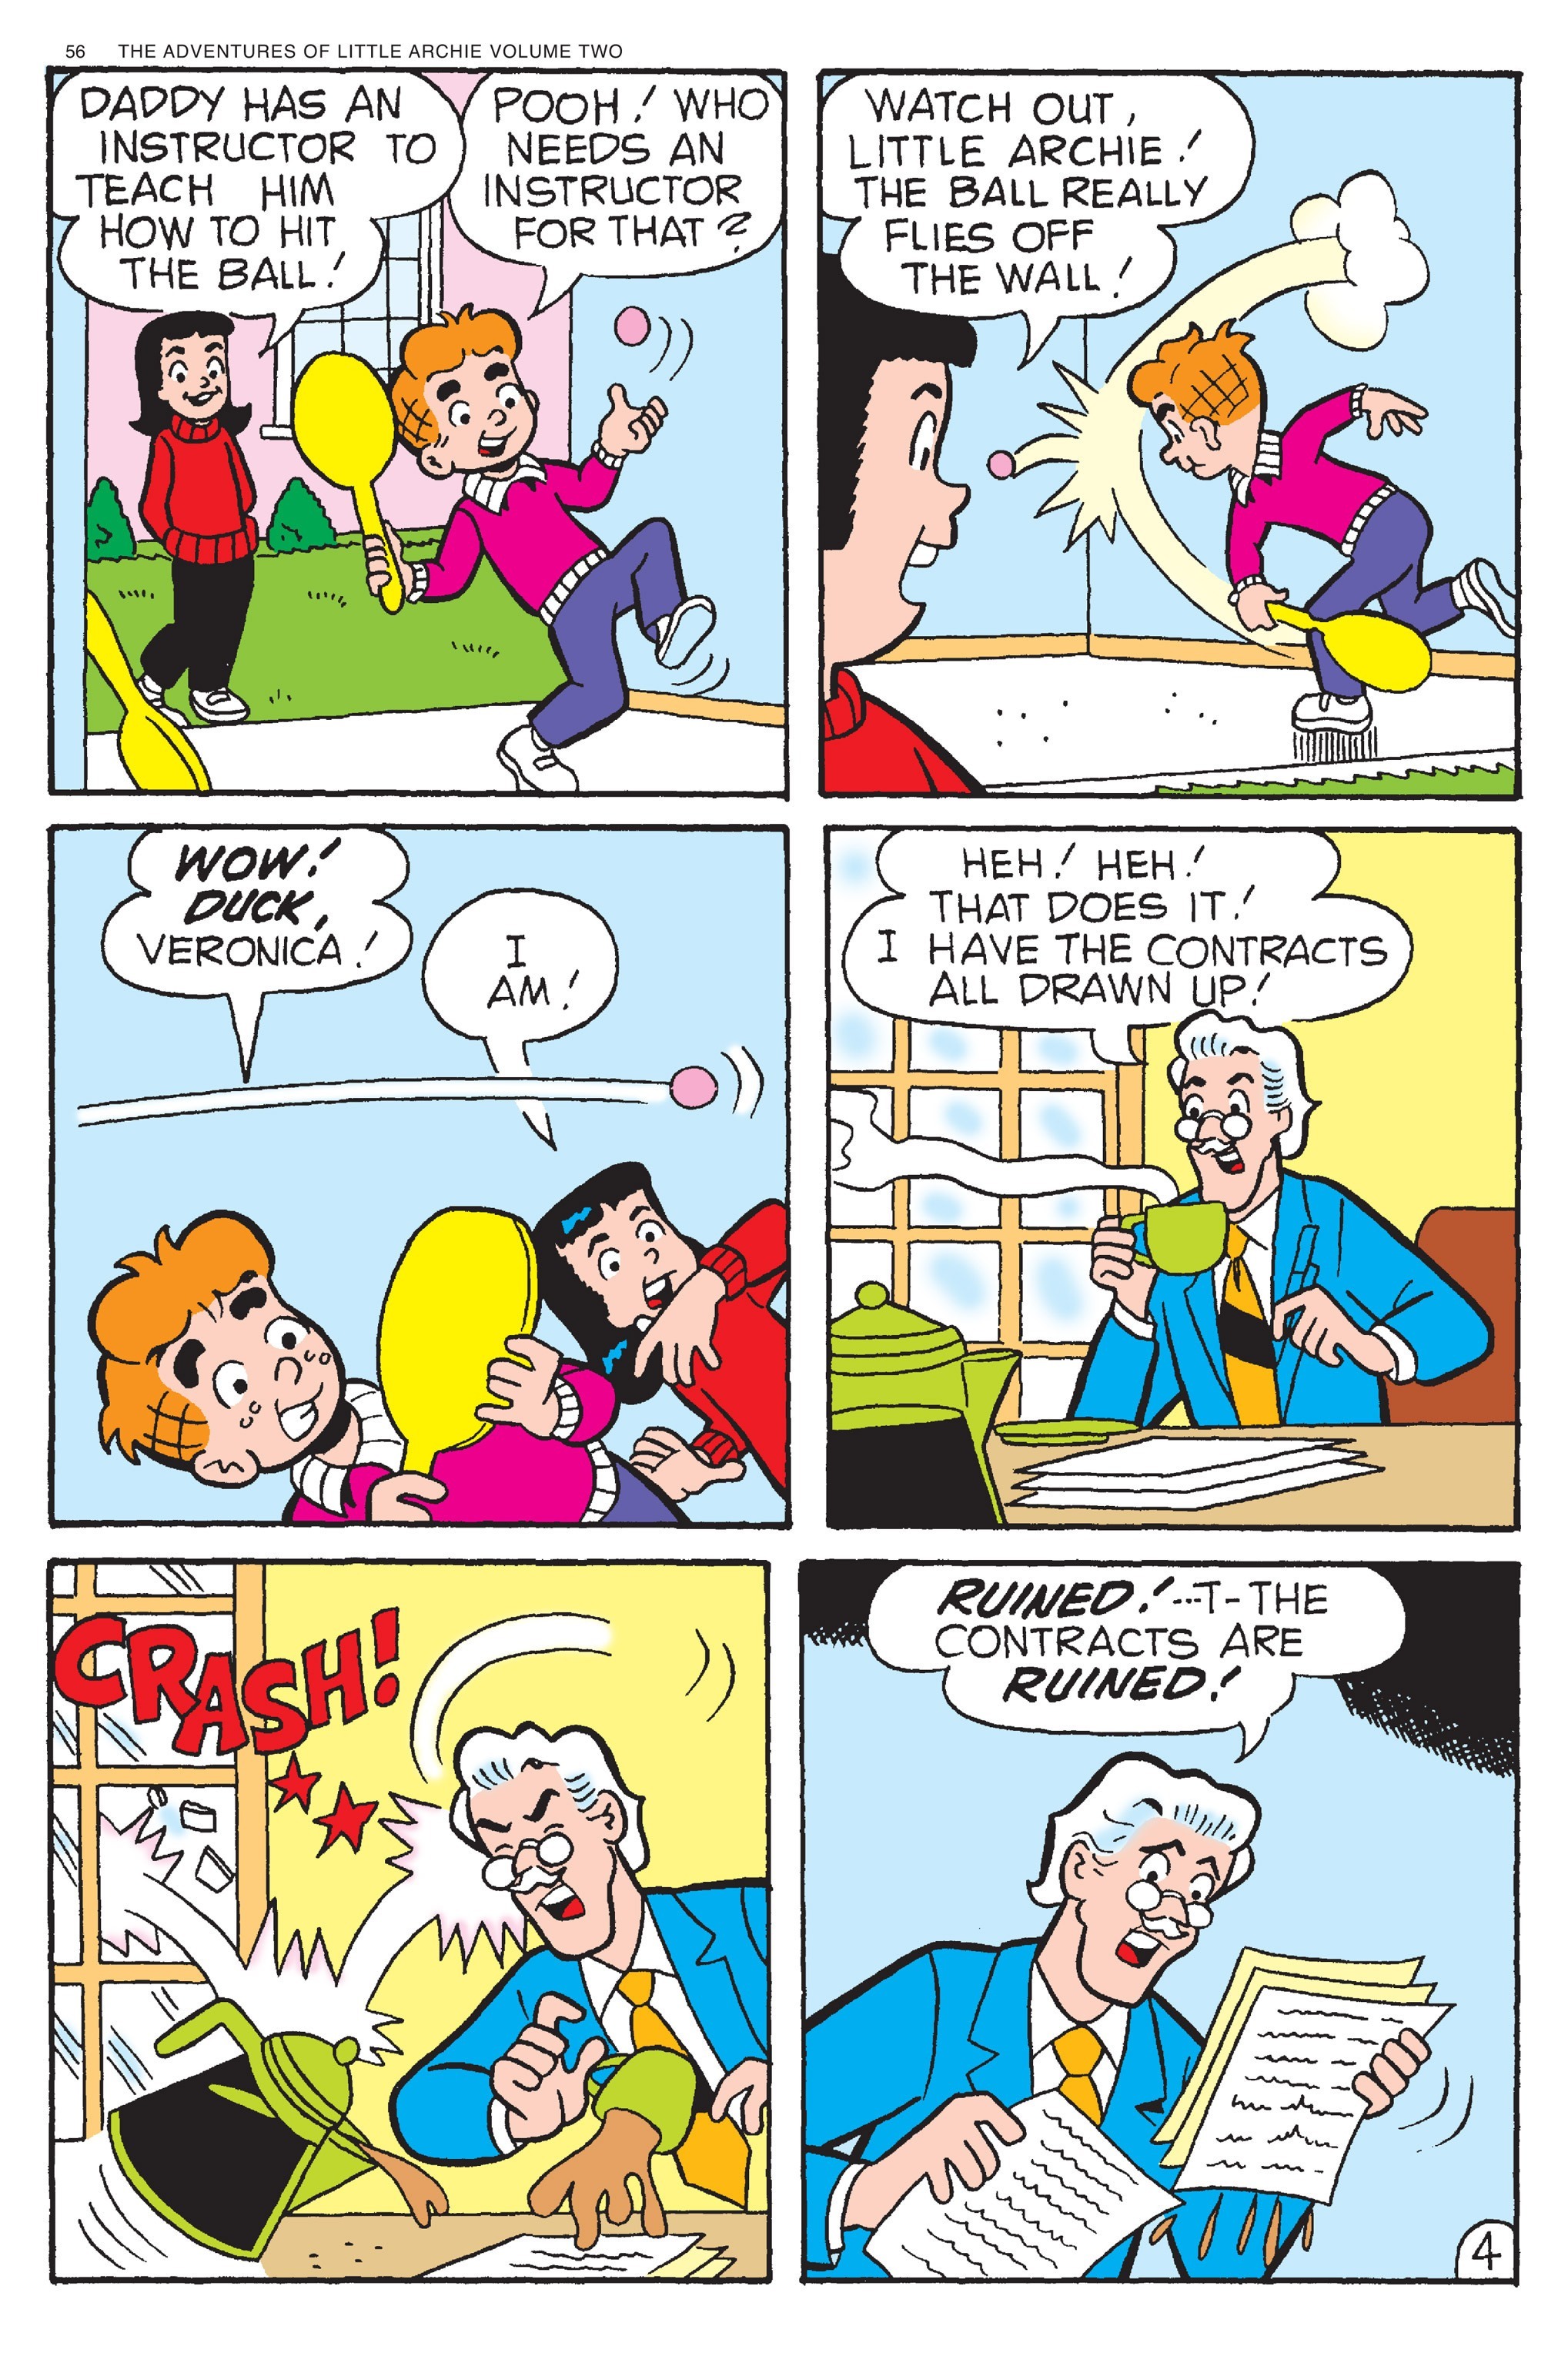 Read online Adventures of Little Archie comic -  Issue # TPB 2 - 57